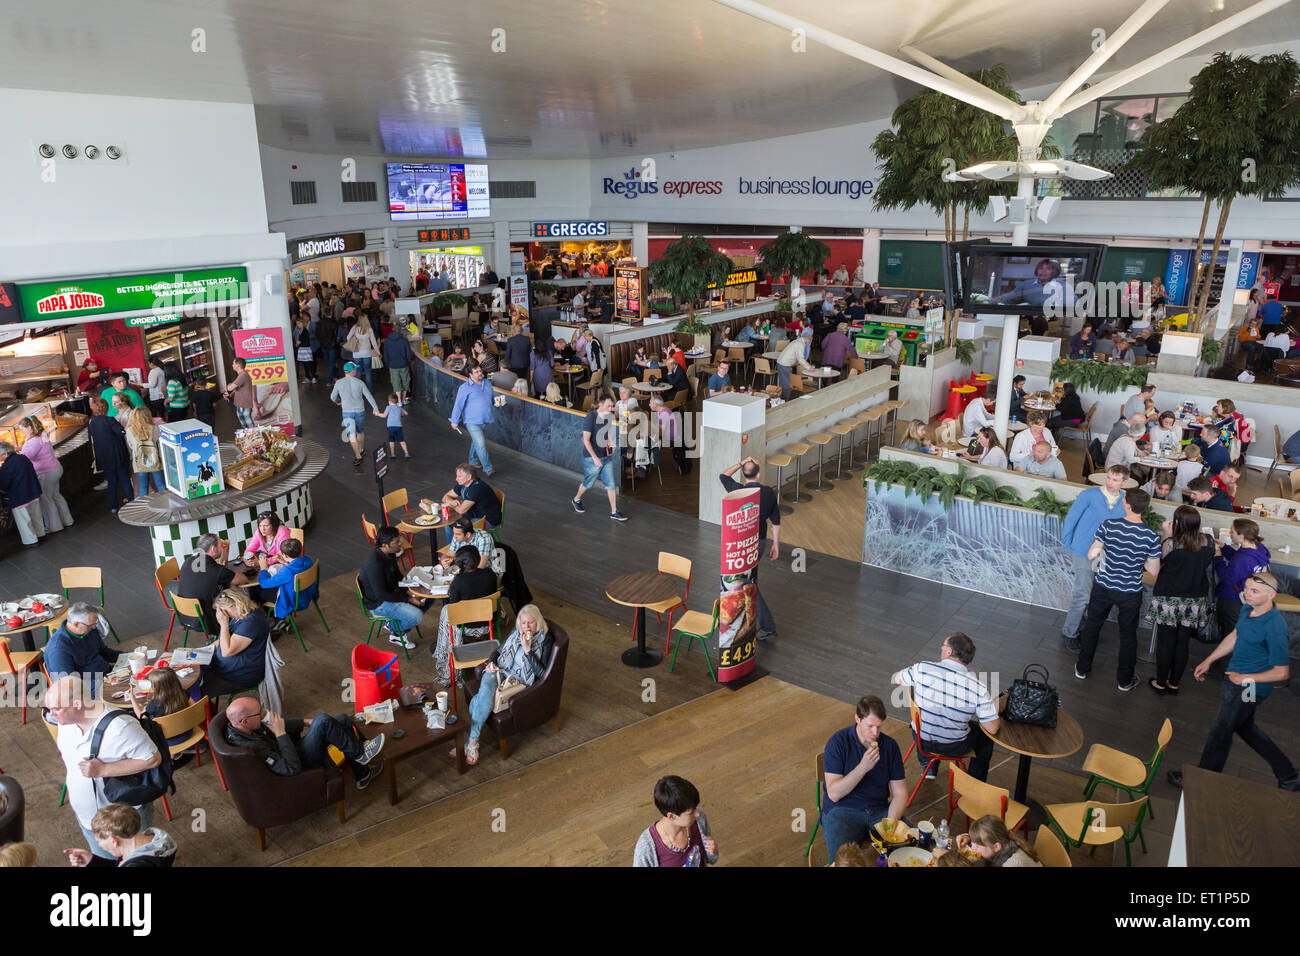 The interior of Cobham Services on the M25, Surrey, England on a busy bank holiday weekend Stock Photo